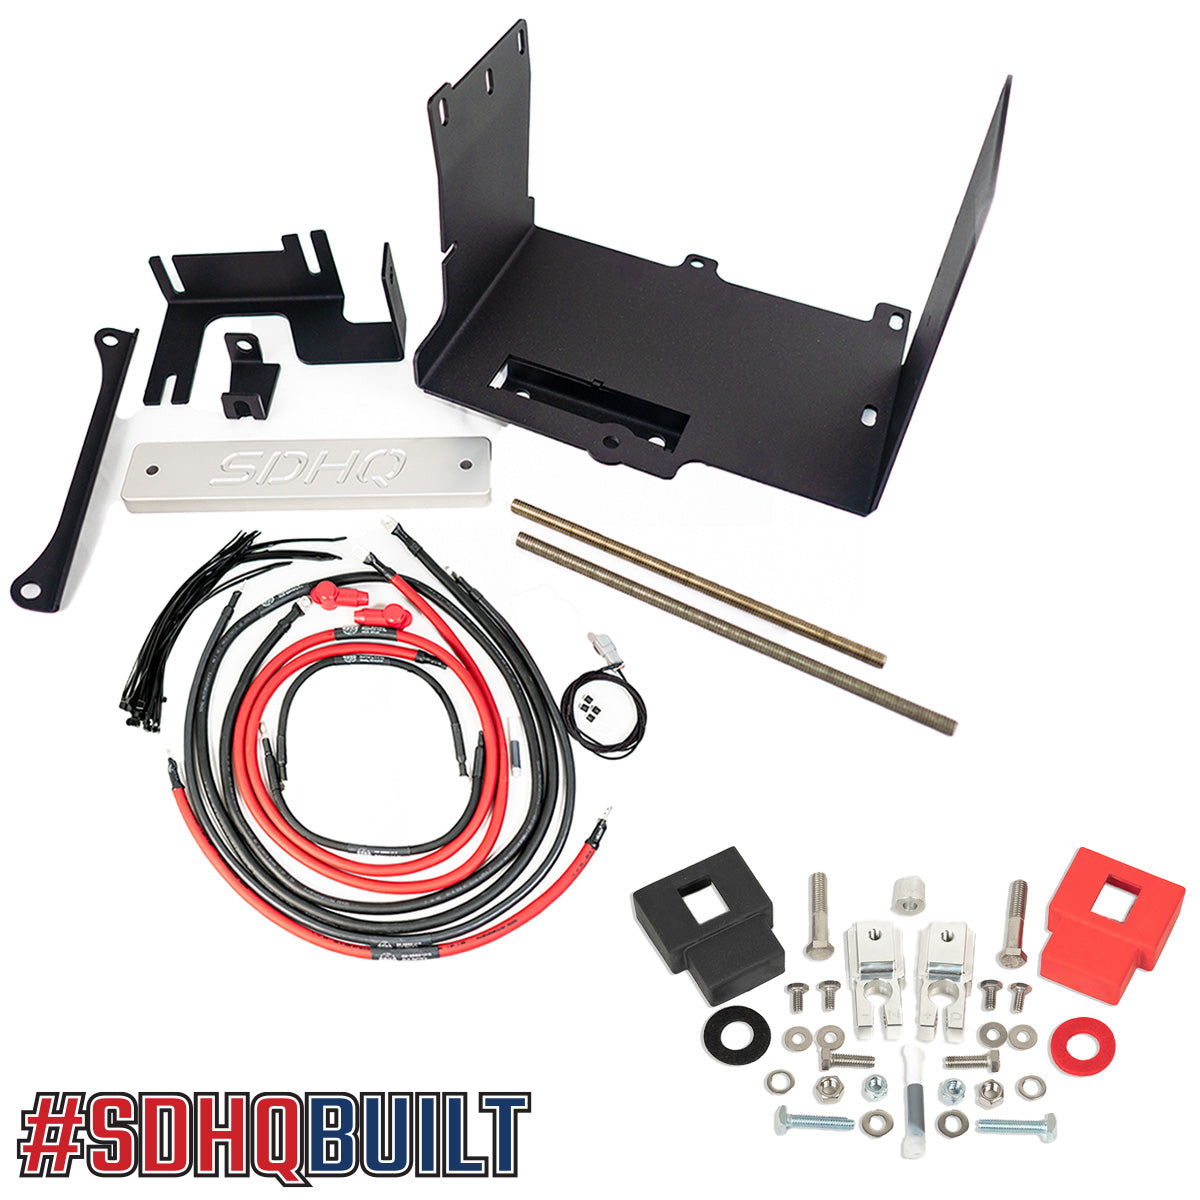 '16-23 Toyota Tacoma SDHQ Built "Build your Own" Dual Battery Kit parts